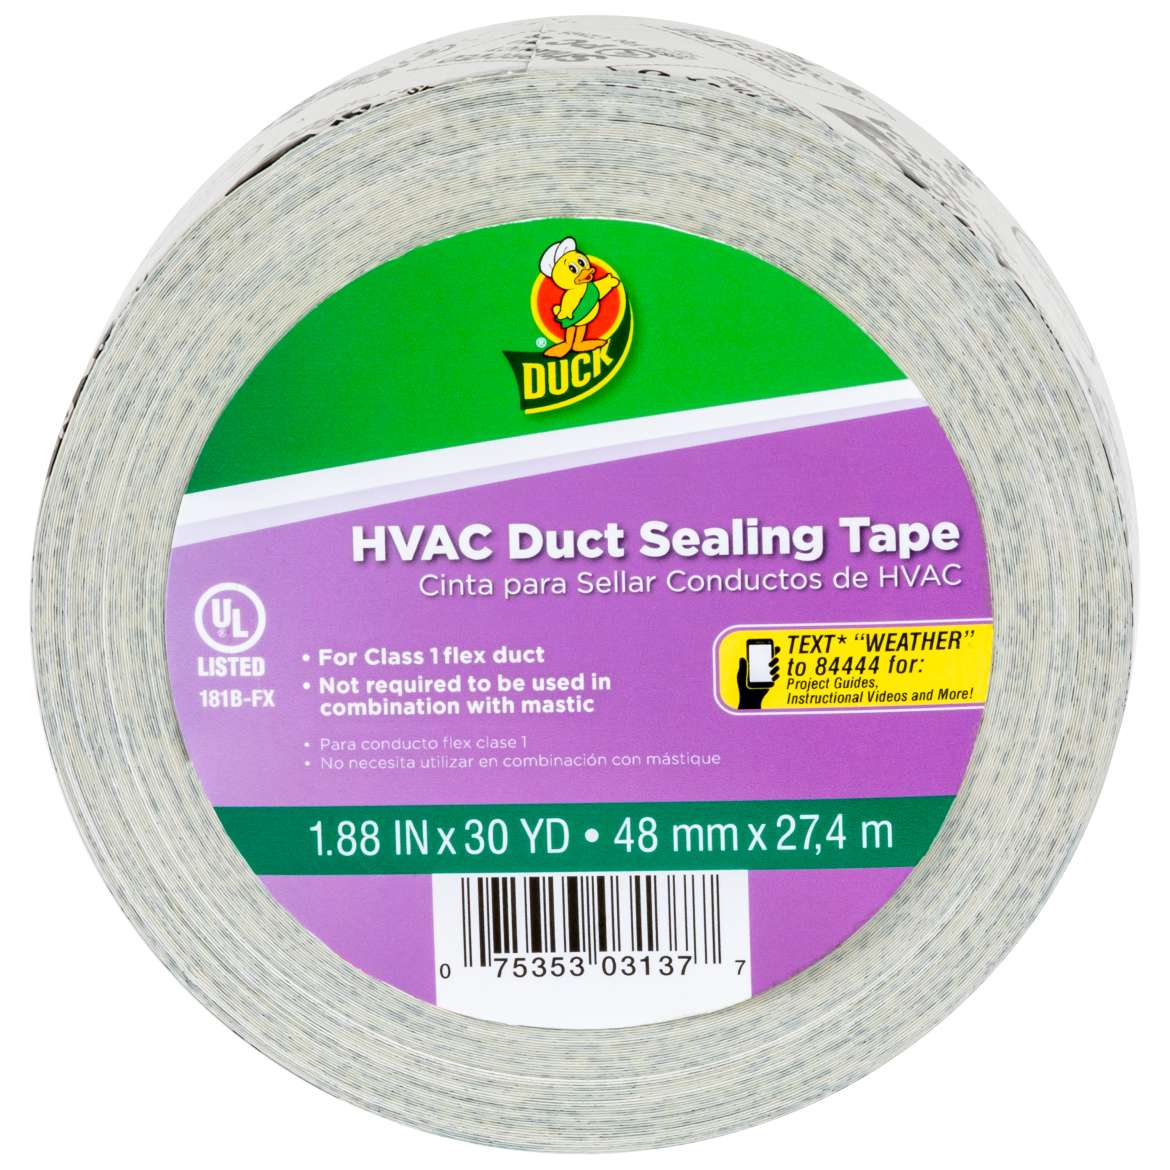 Duck® Brand HVAC Duct Sealing Tape - Silver, 1.88 in. x 30 yd.